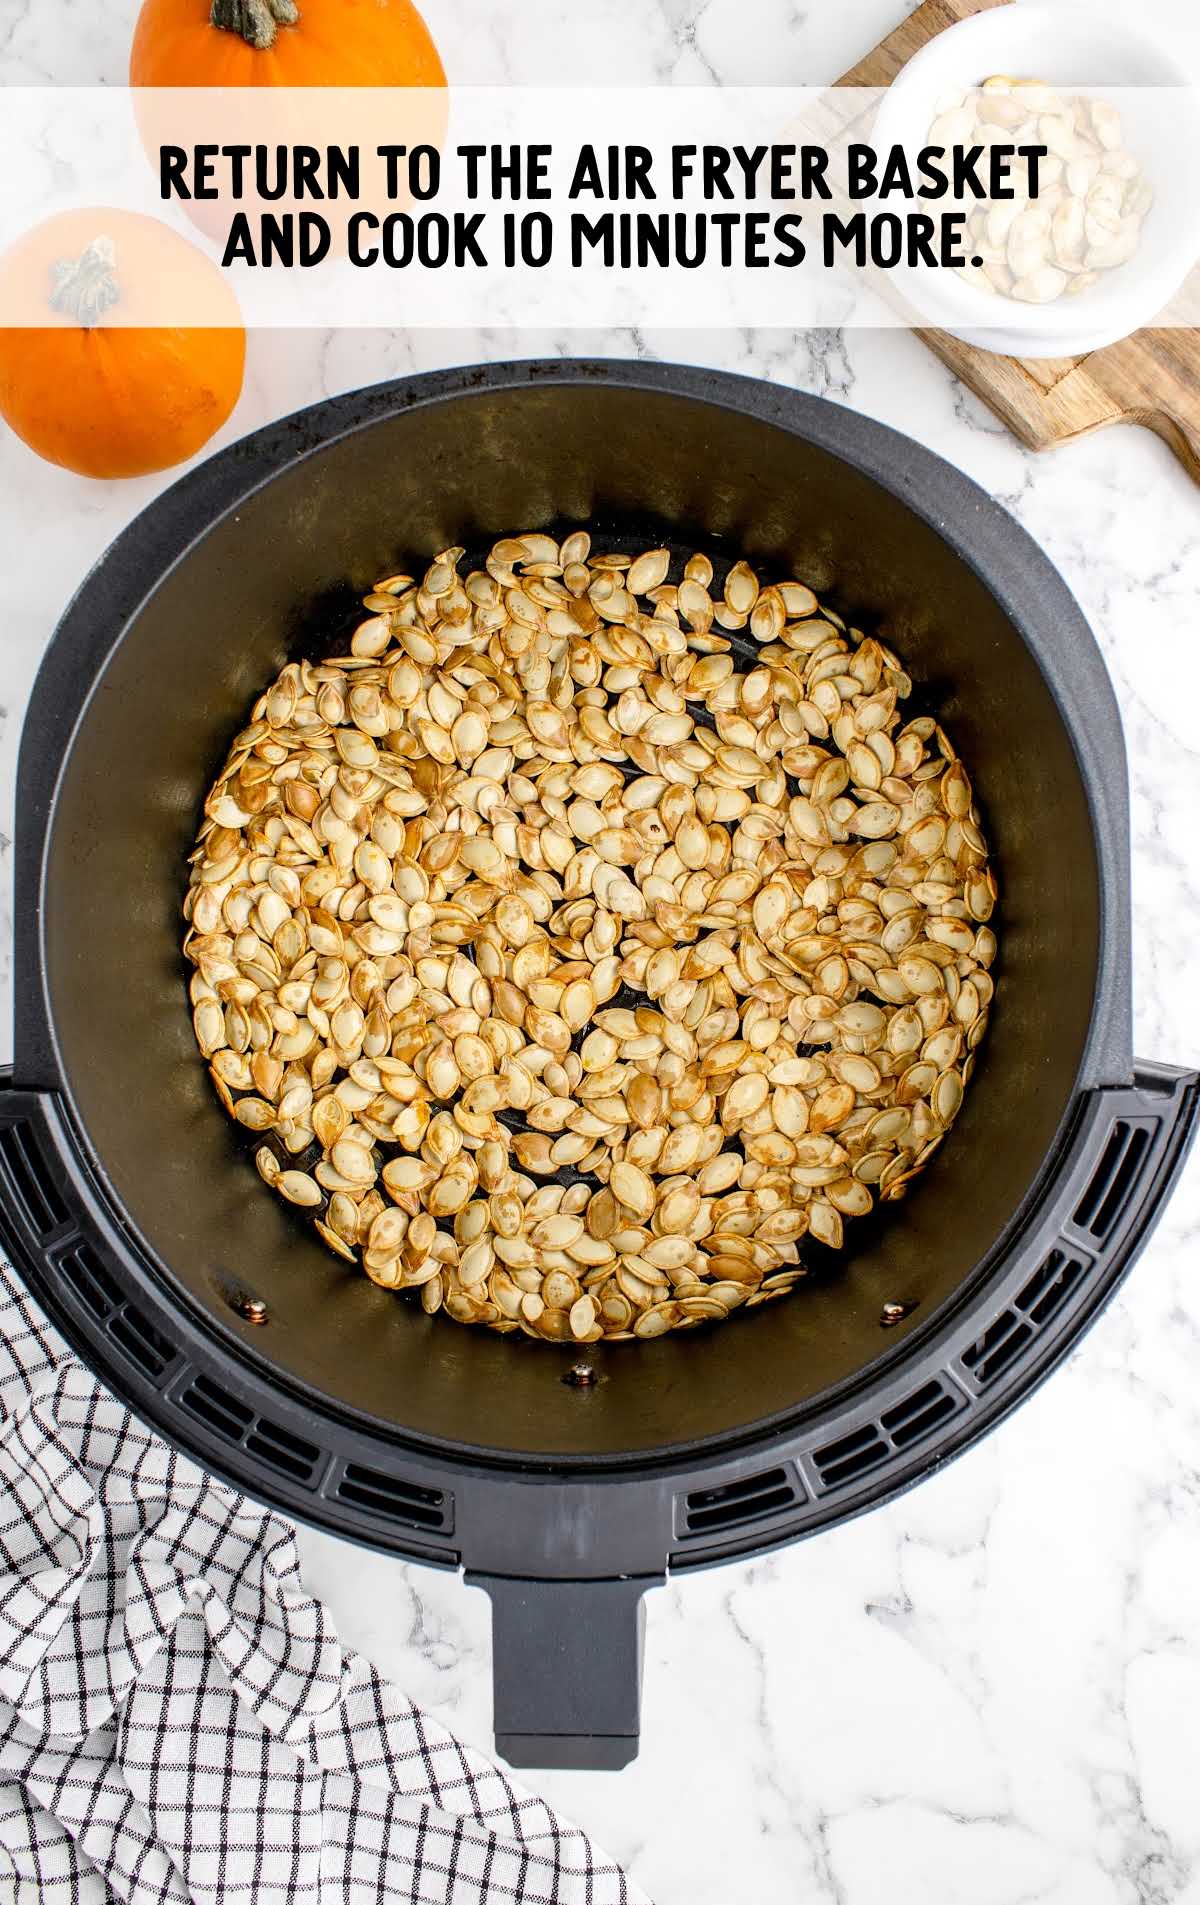 return seeds to air fryer and cook